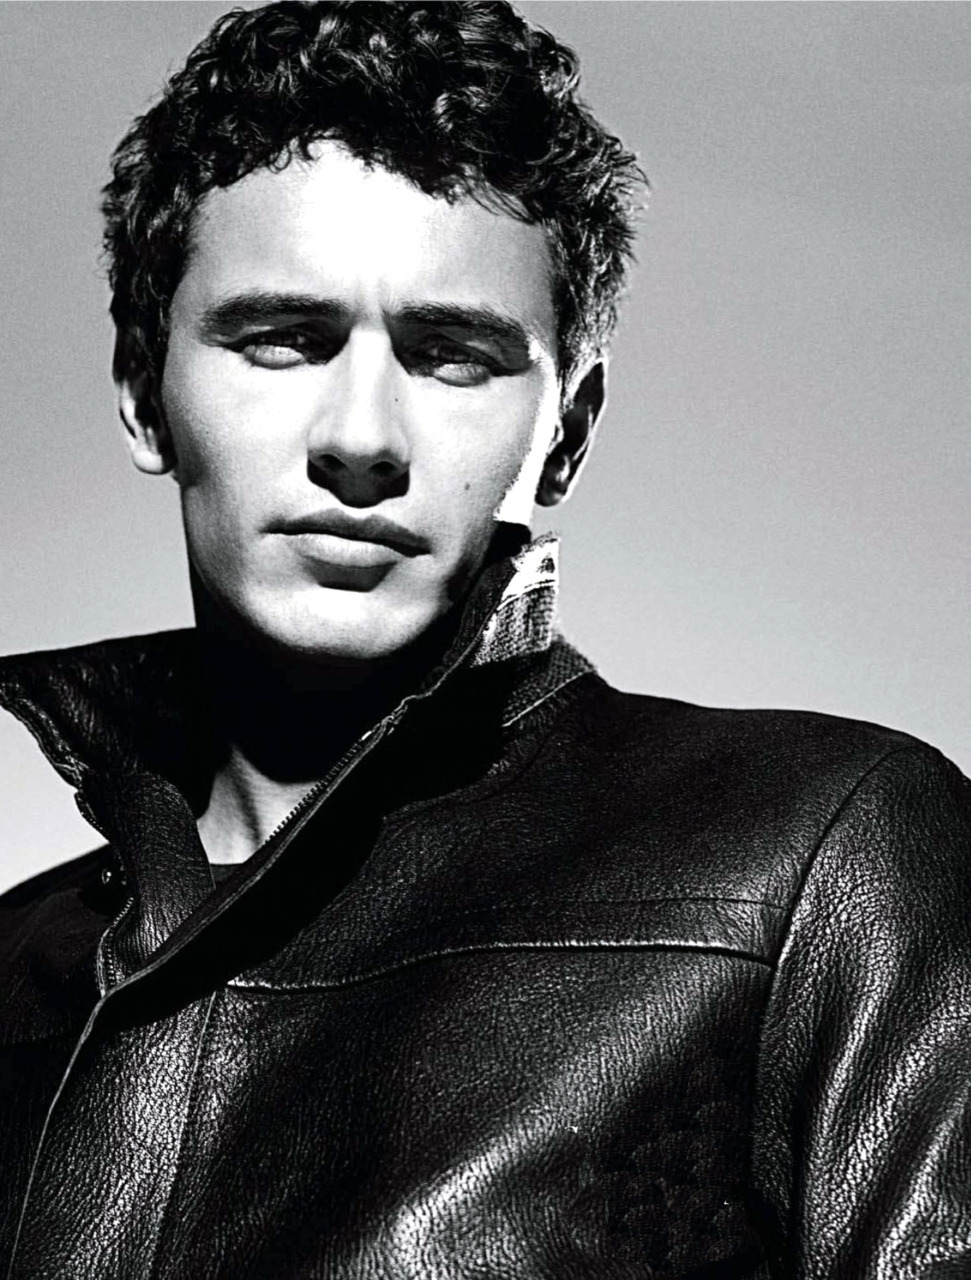 James Franco disputes sexual misconduct allegations